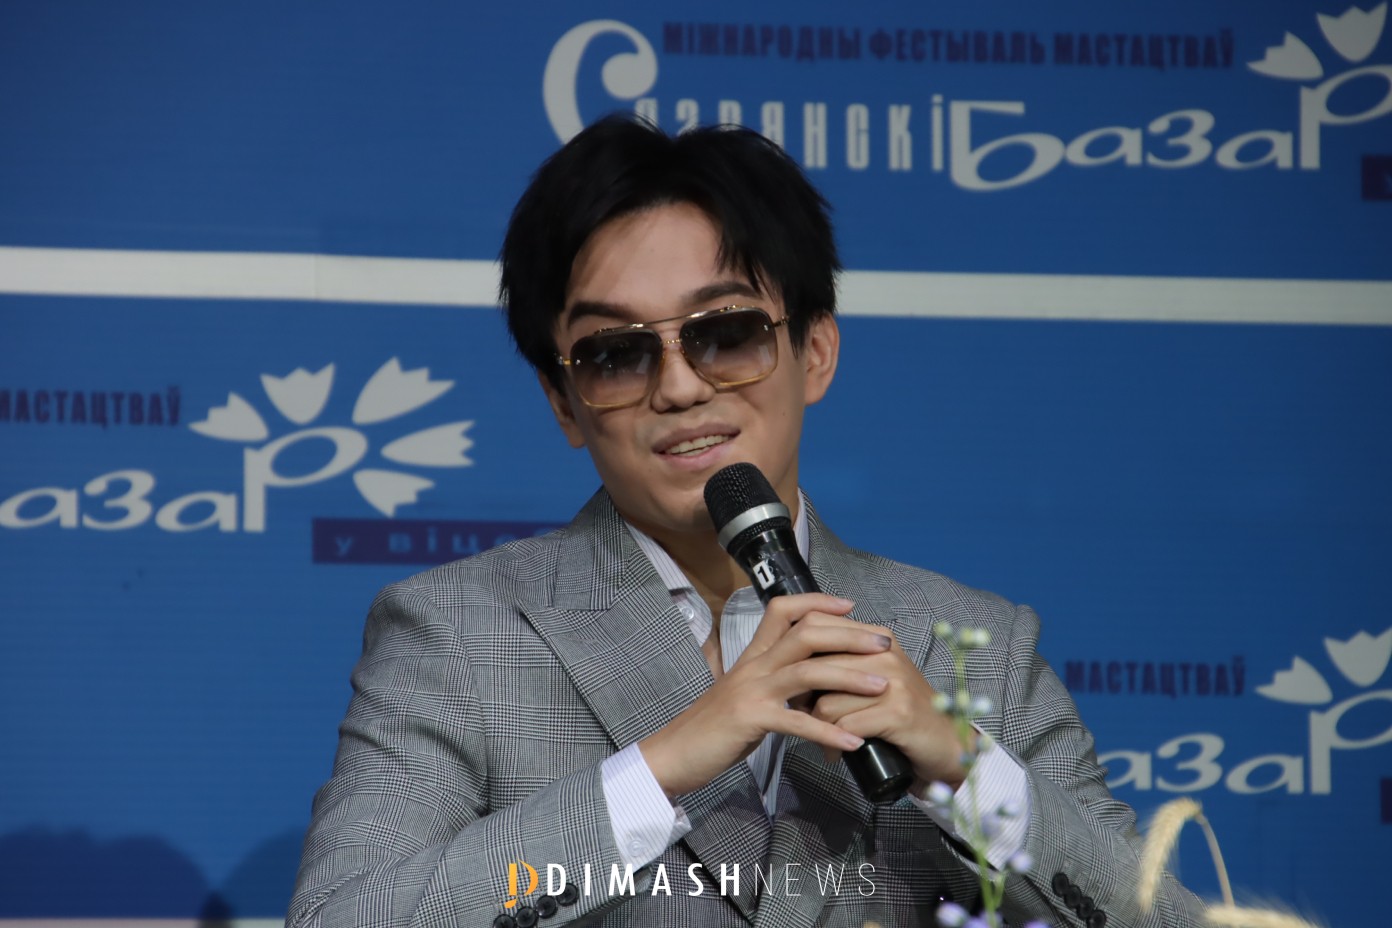 Dimash in Vitebsk: Big solo concert is to be expected, unless the pandemic hits again